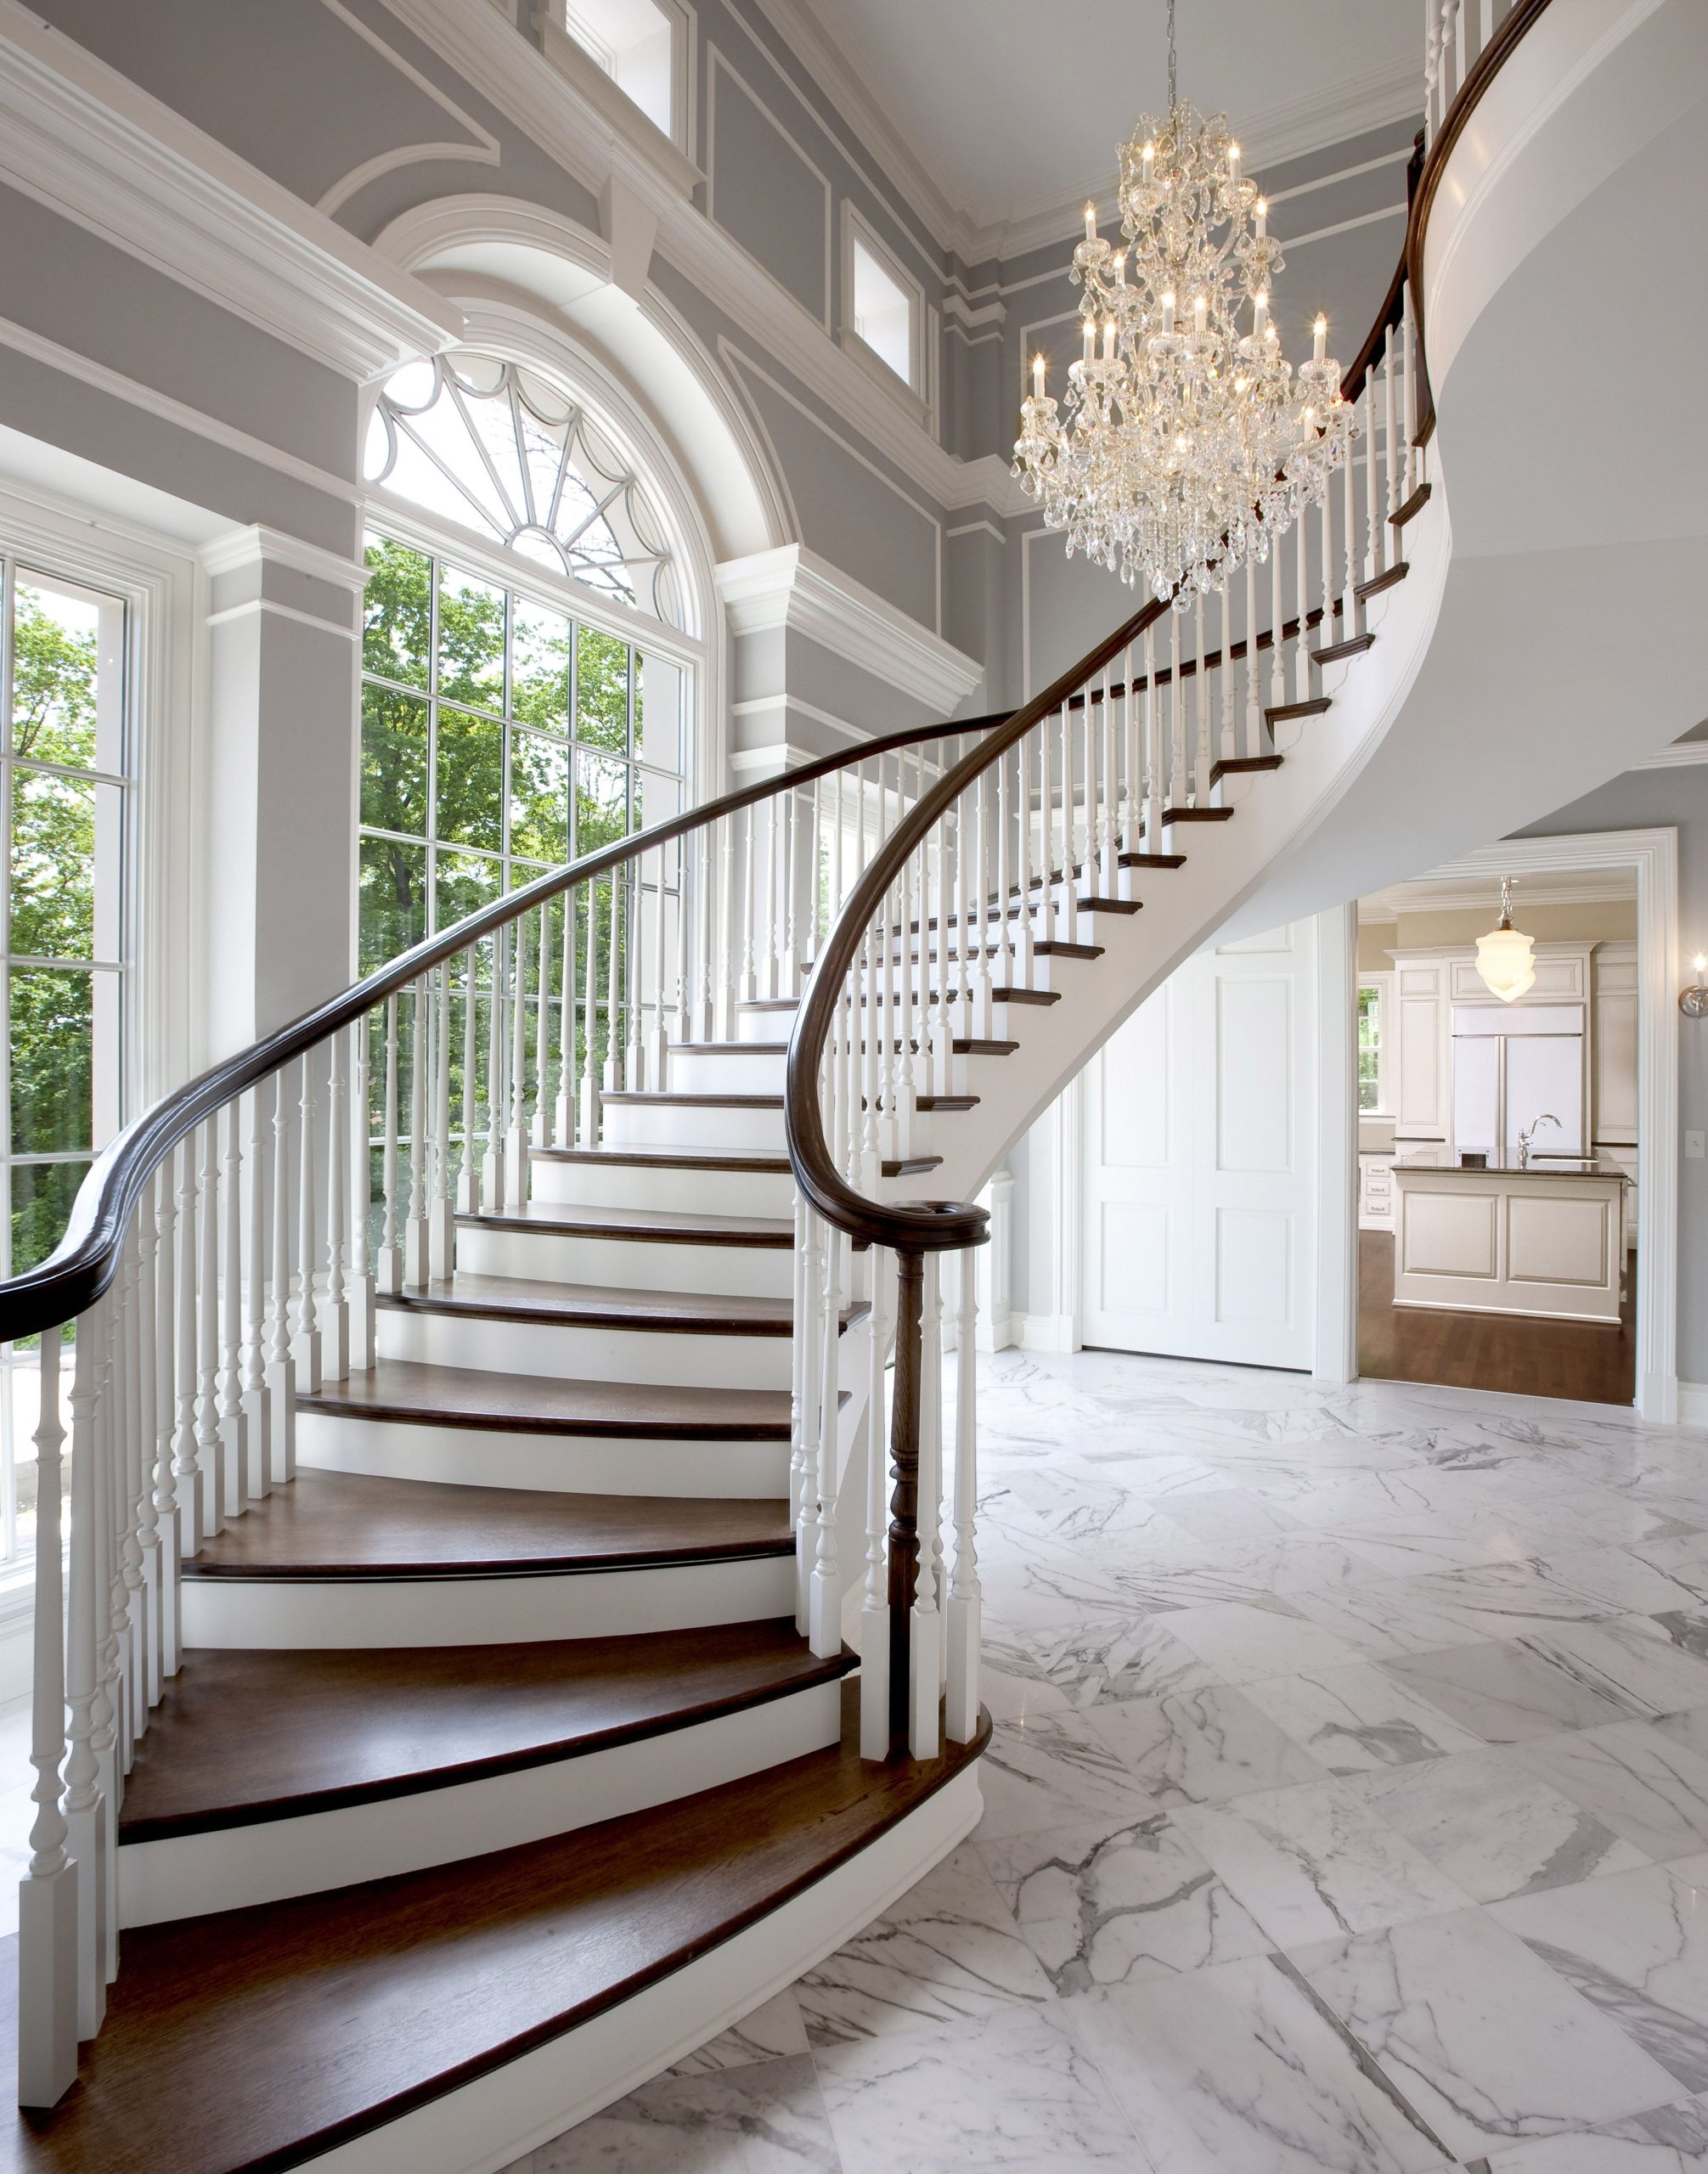 Statement Stairs: Elevating Your Home With Stylish Staircase Designs